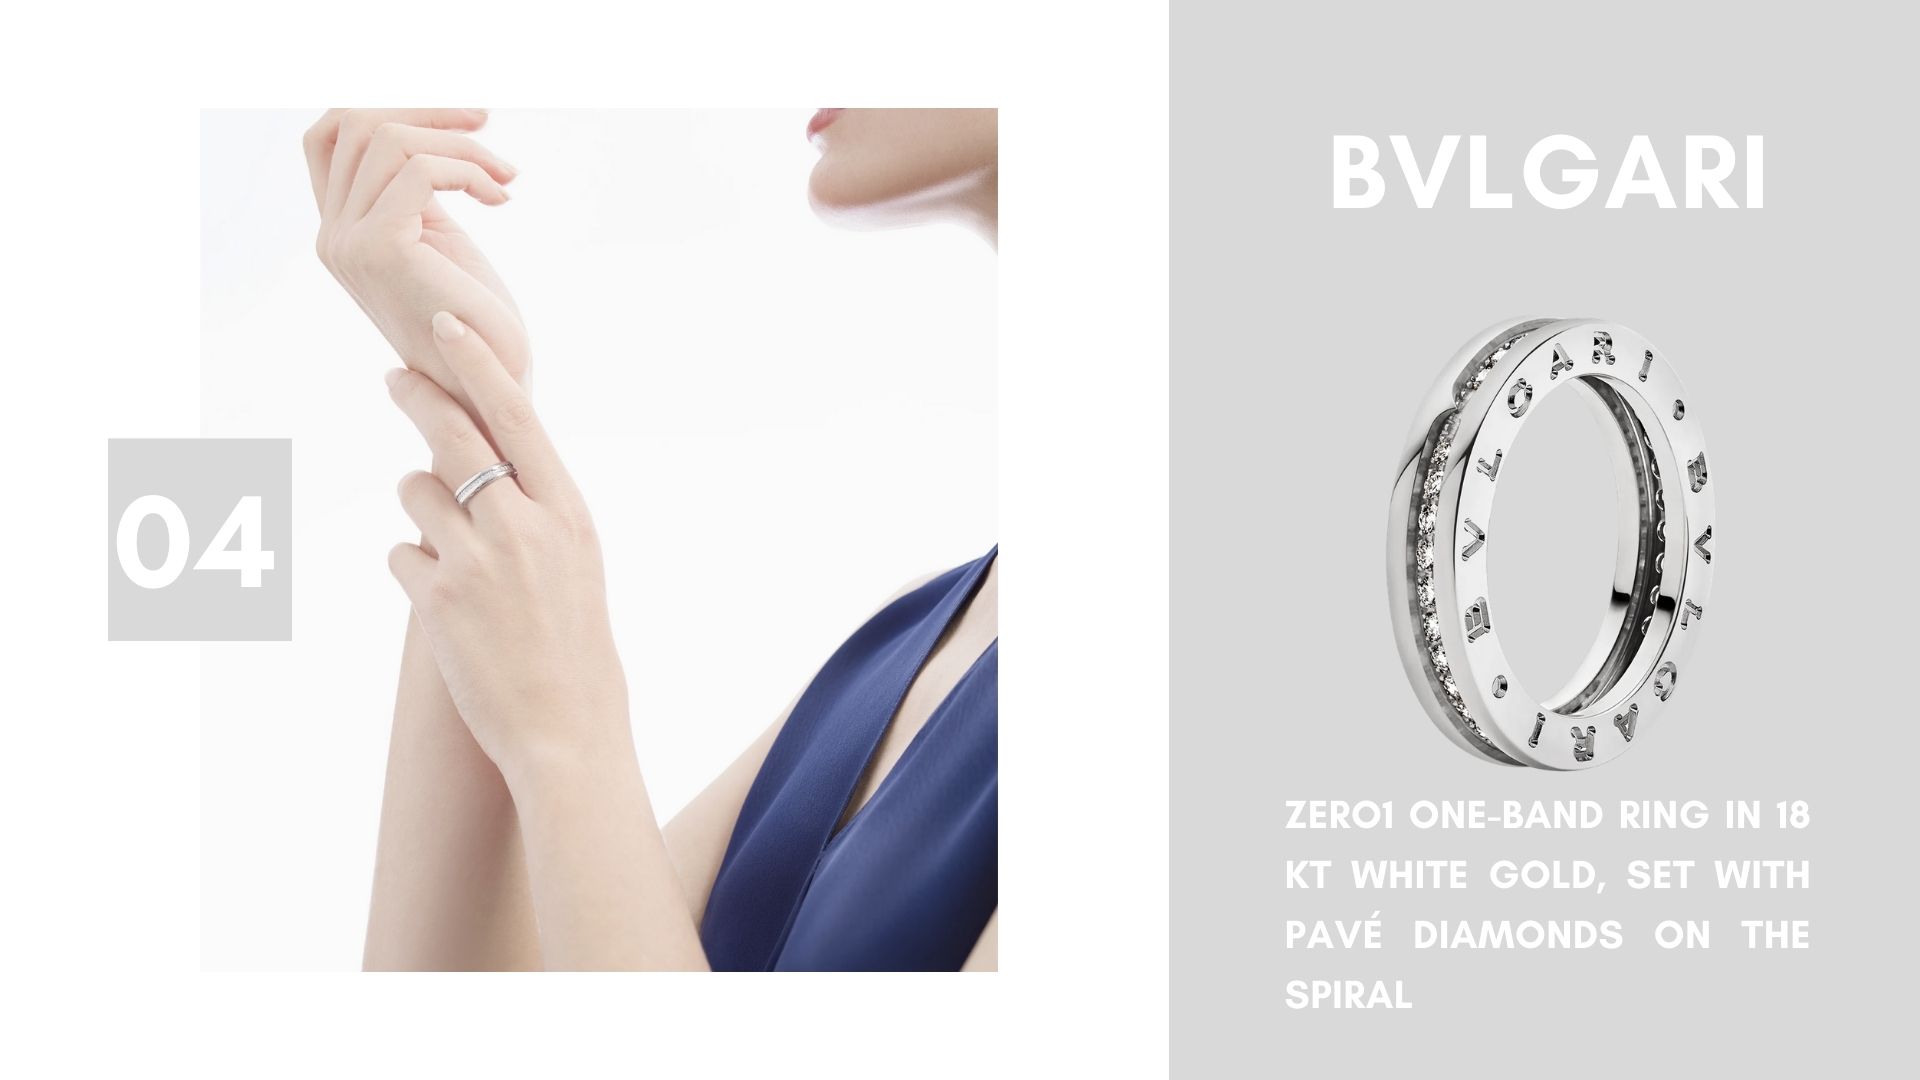 B.zero1 one-band ring in 18 kt white gold, set with pavé diamonds on the spiral.